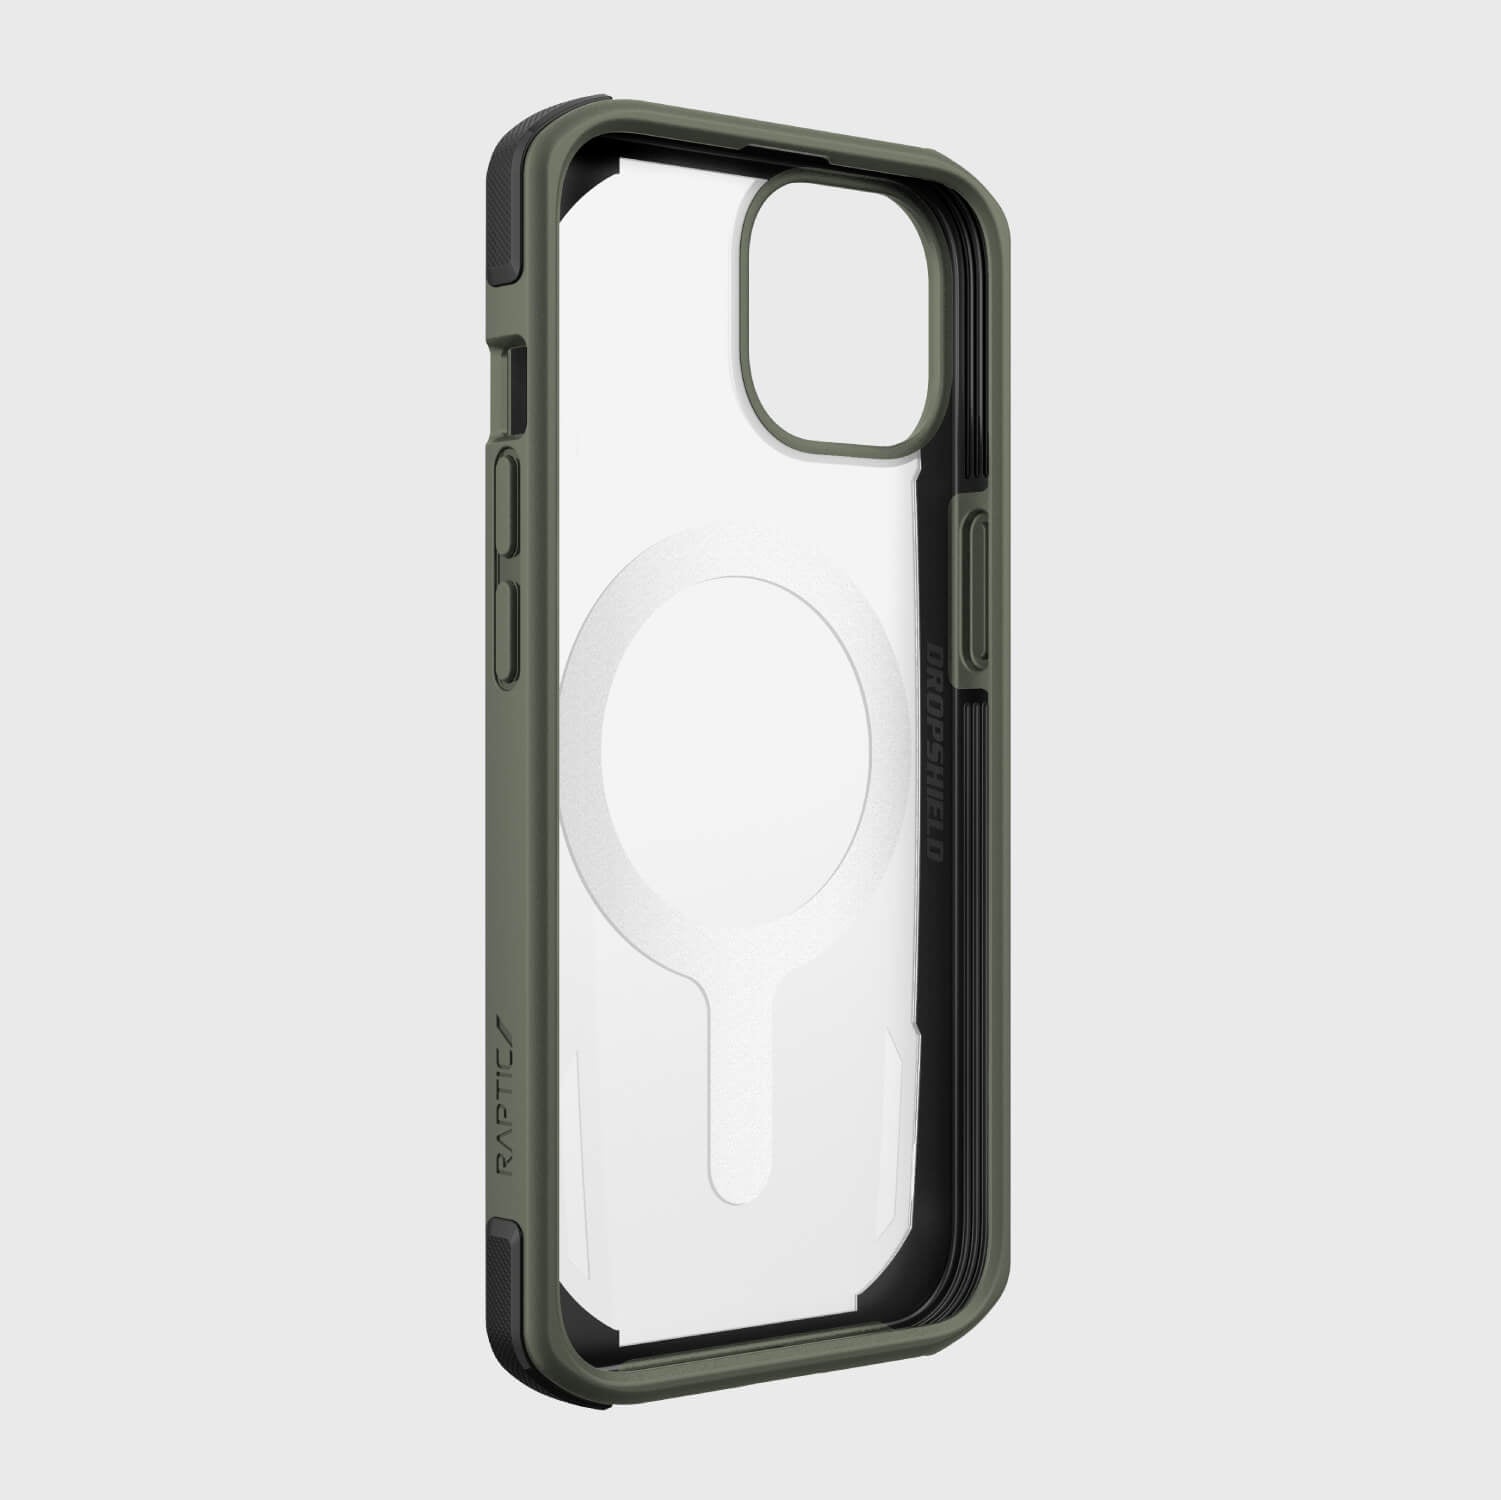 The iPhone 14 Case ~ Secure built for MagSafe in olive green by Raptic.